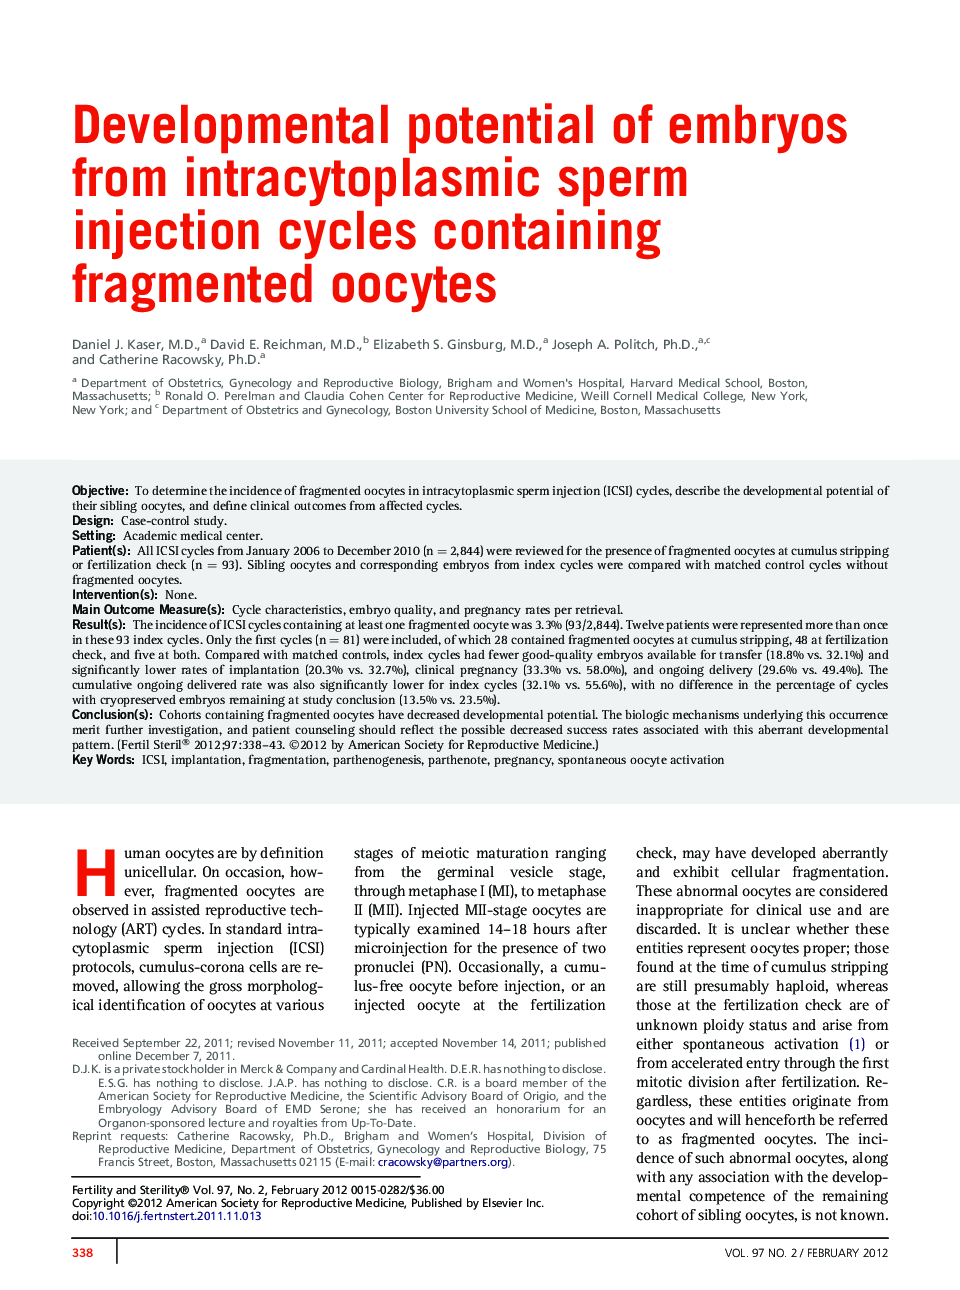 Developmental potential of embryos from intracytoplasmic sperm injection cycles containing fragmented oocytes 